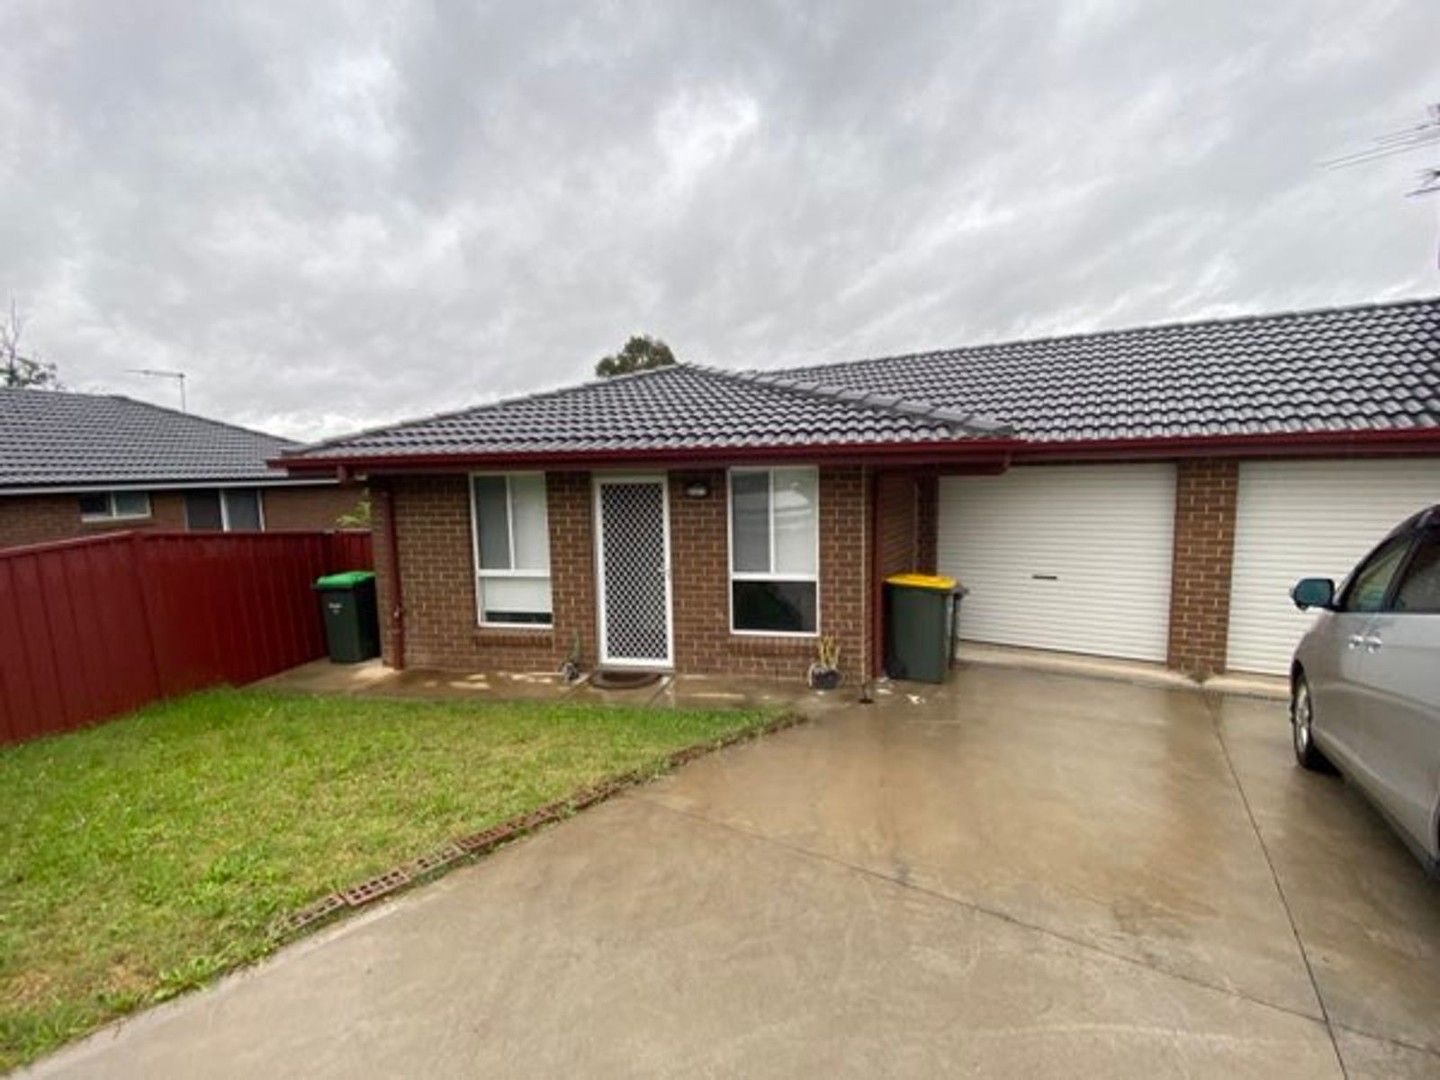 2 bedrooms House in 9A Calcite Place EAGLE VALE NSW, 2558